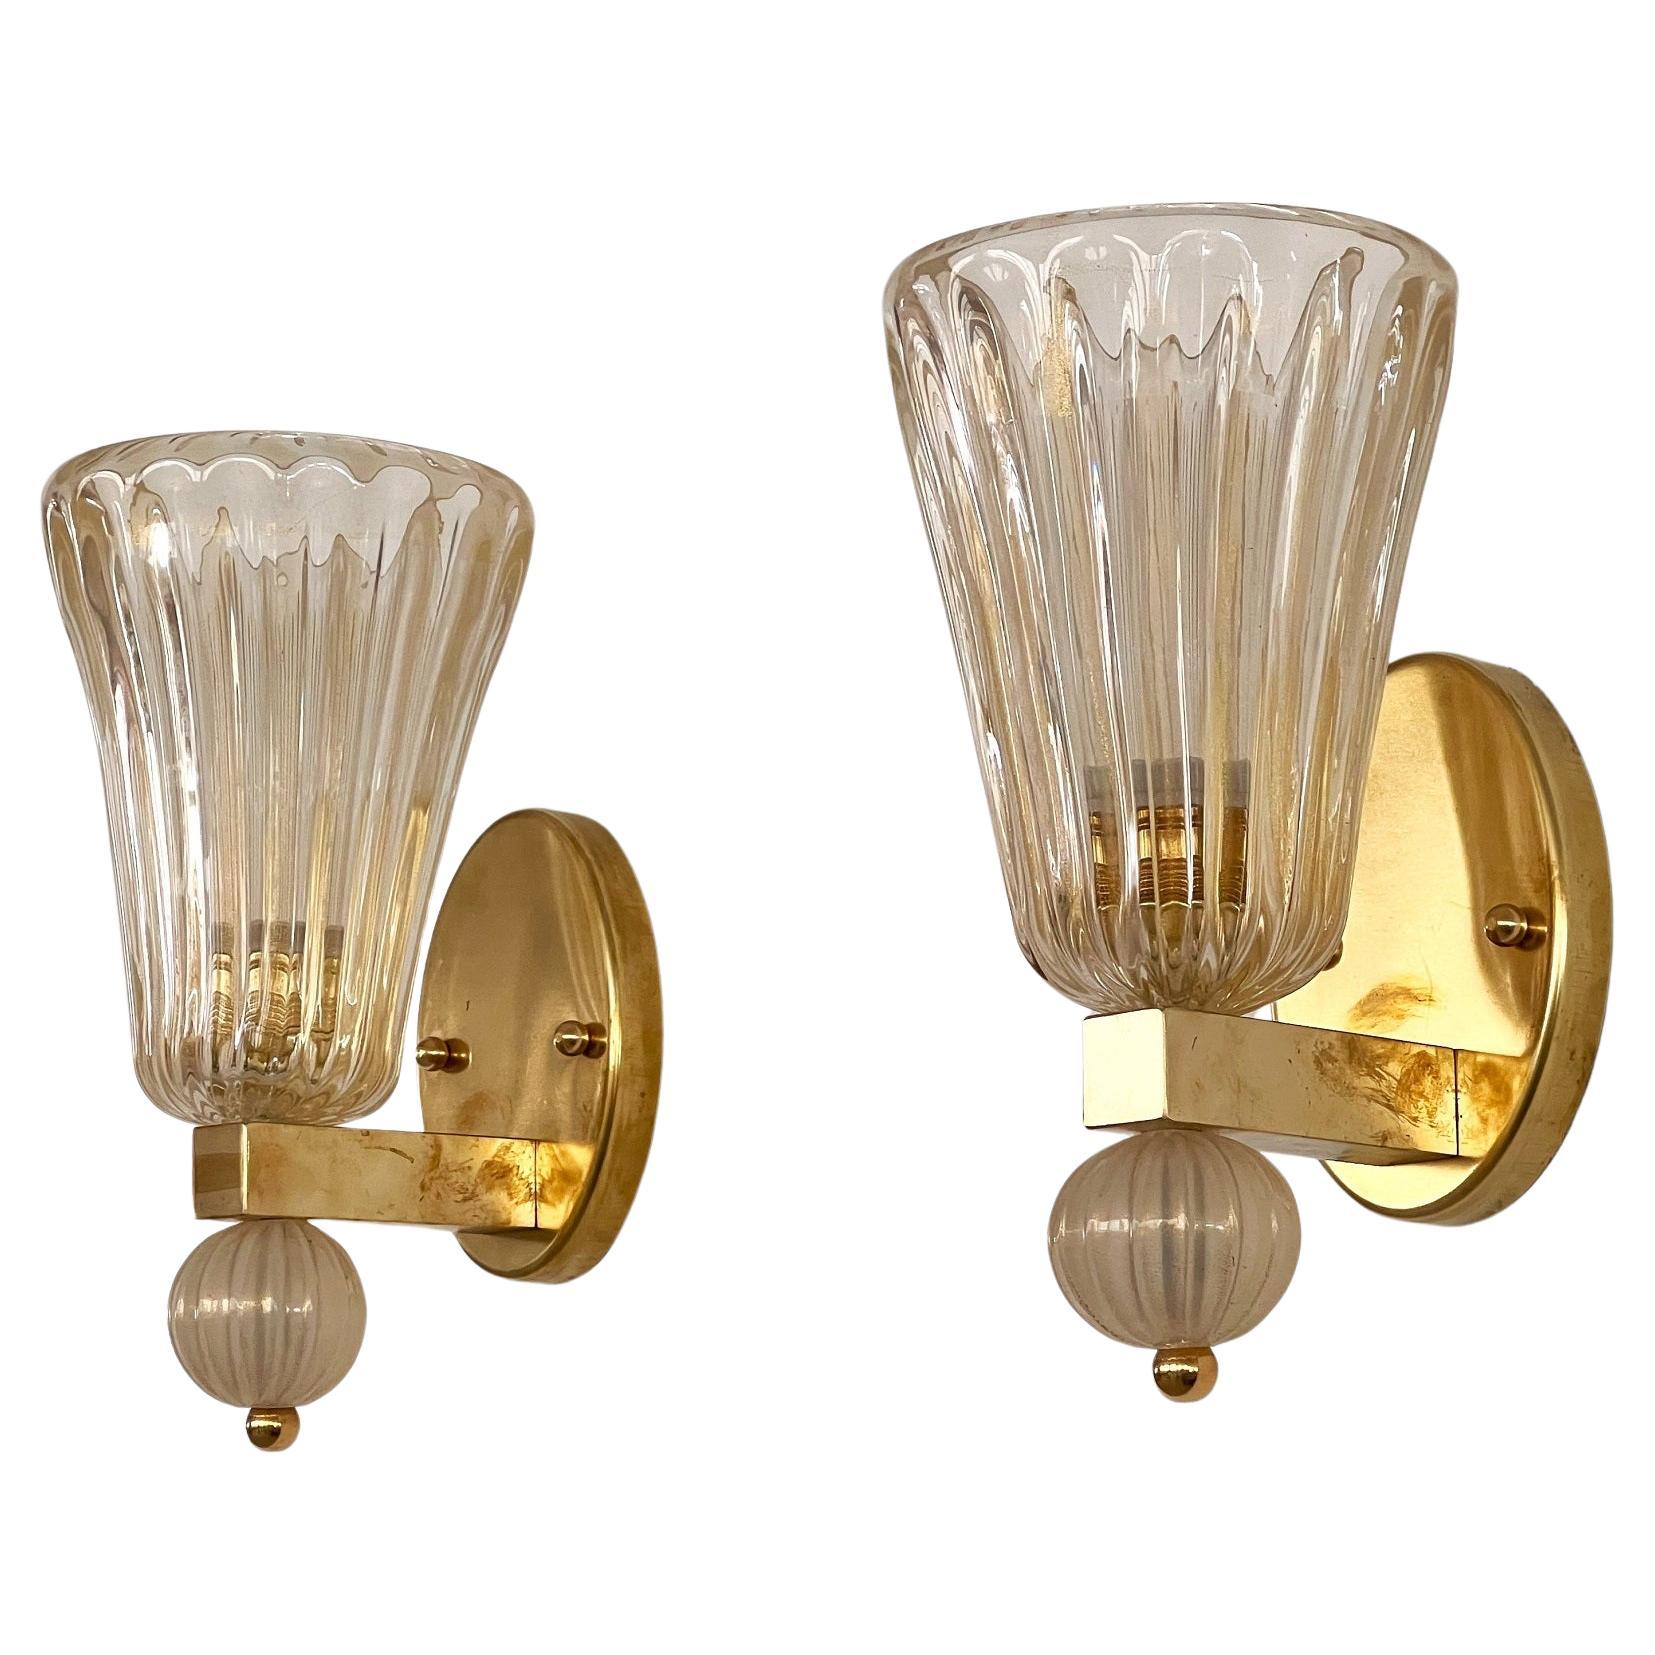 Italian Brass and Murano Glass Wall Lights or Sconces in Art Deco Style, 1990s For Sale